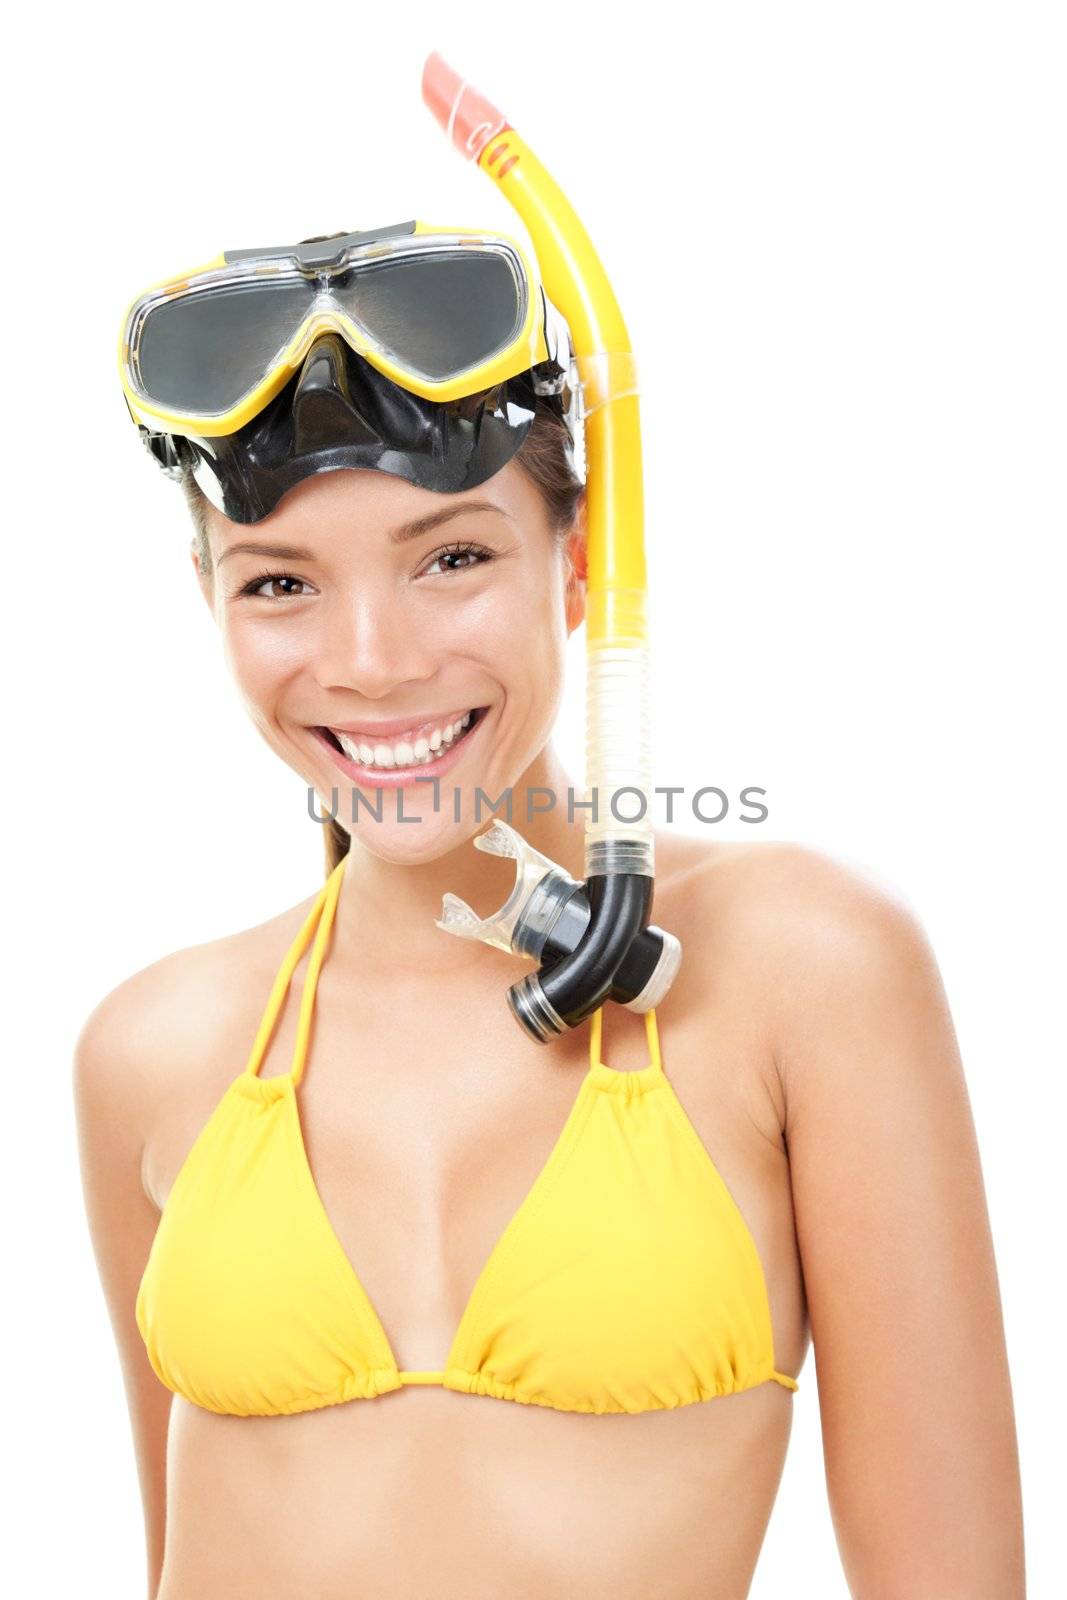 Woman snorkeler with goggles, flippers and snorkel smiling in summer bikini. Snorkeling, swimming, vacation concept isolated on white background. Chinese Asian / Caucasian female model